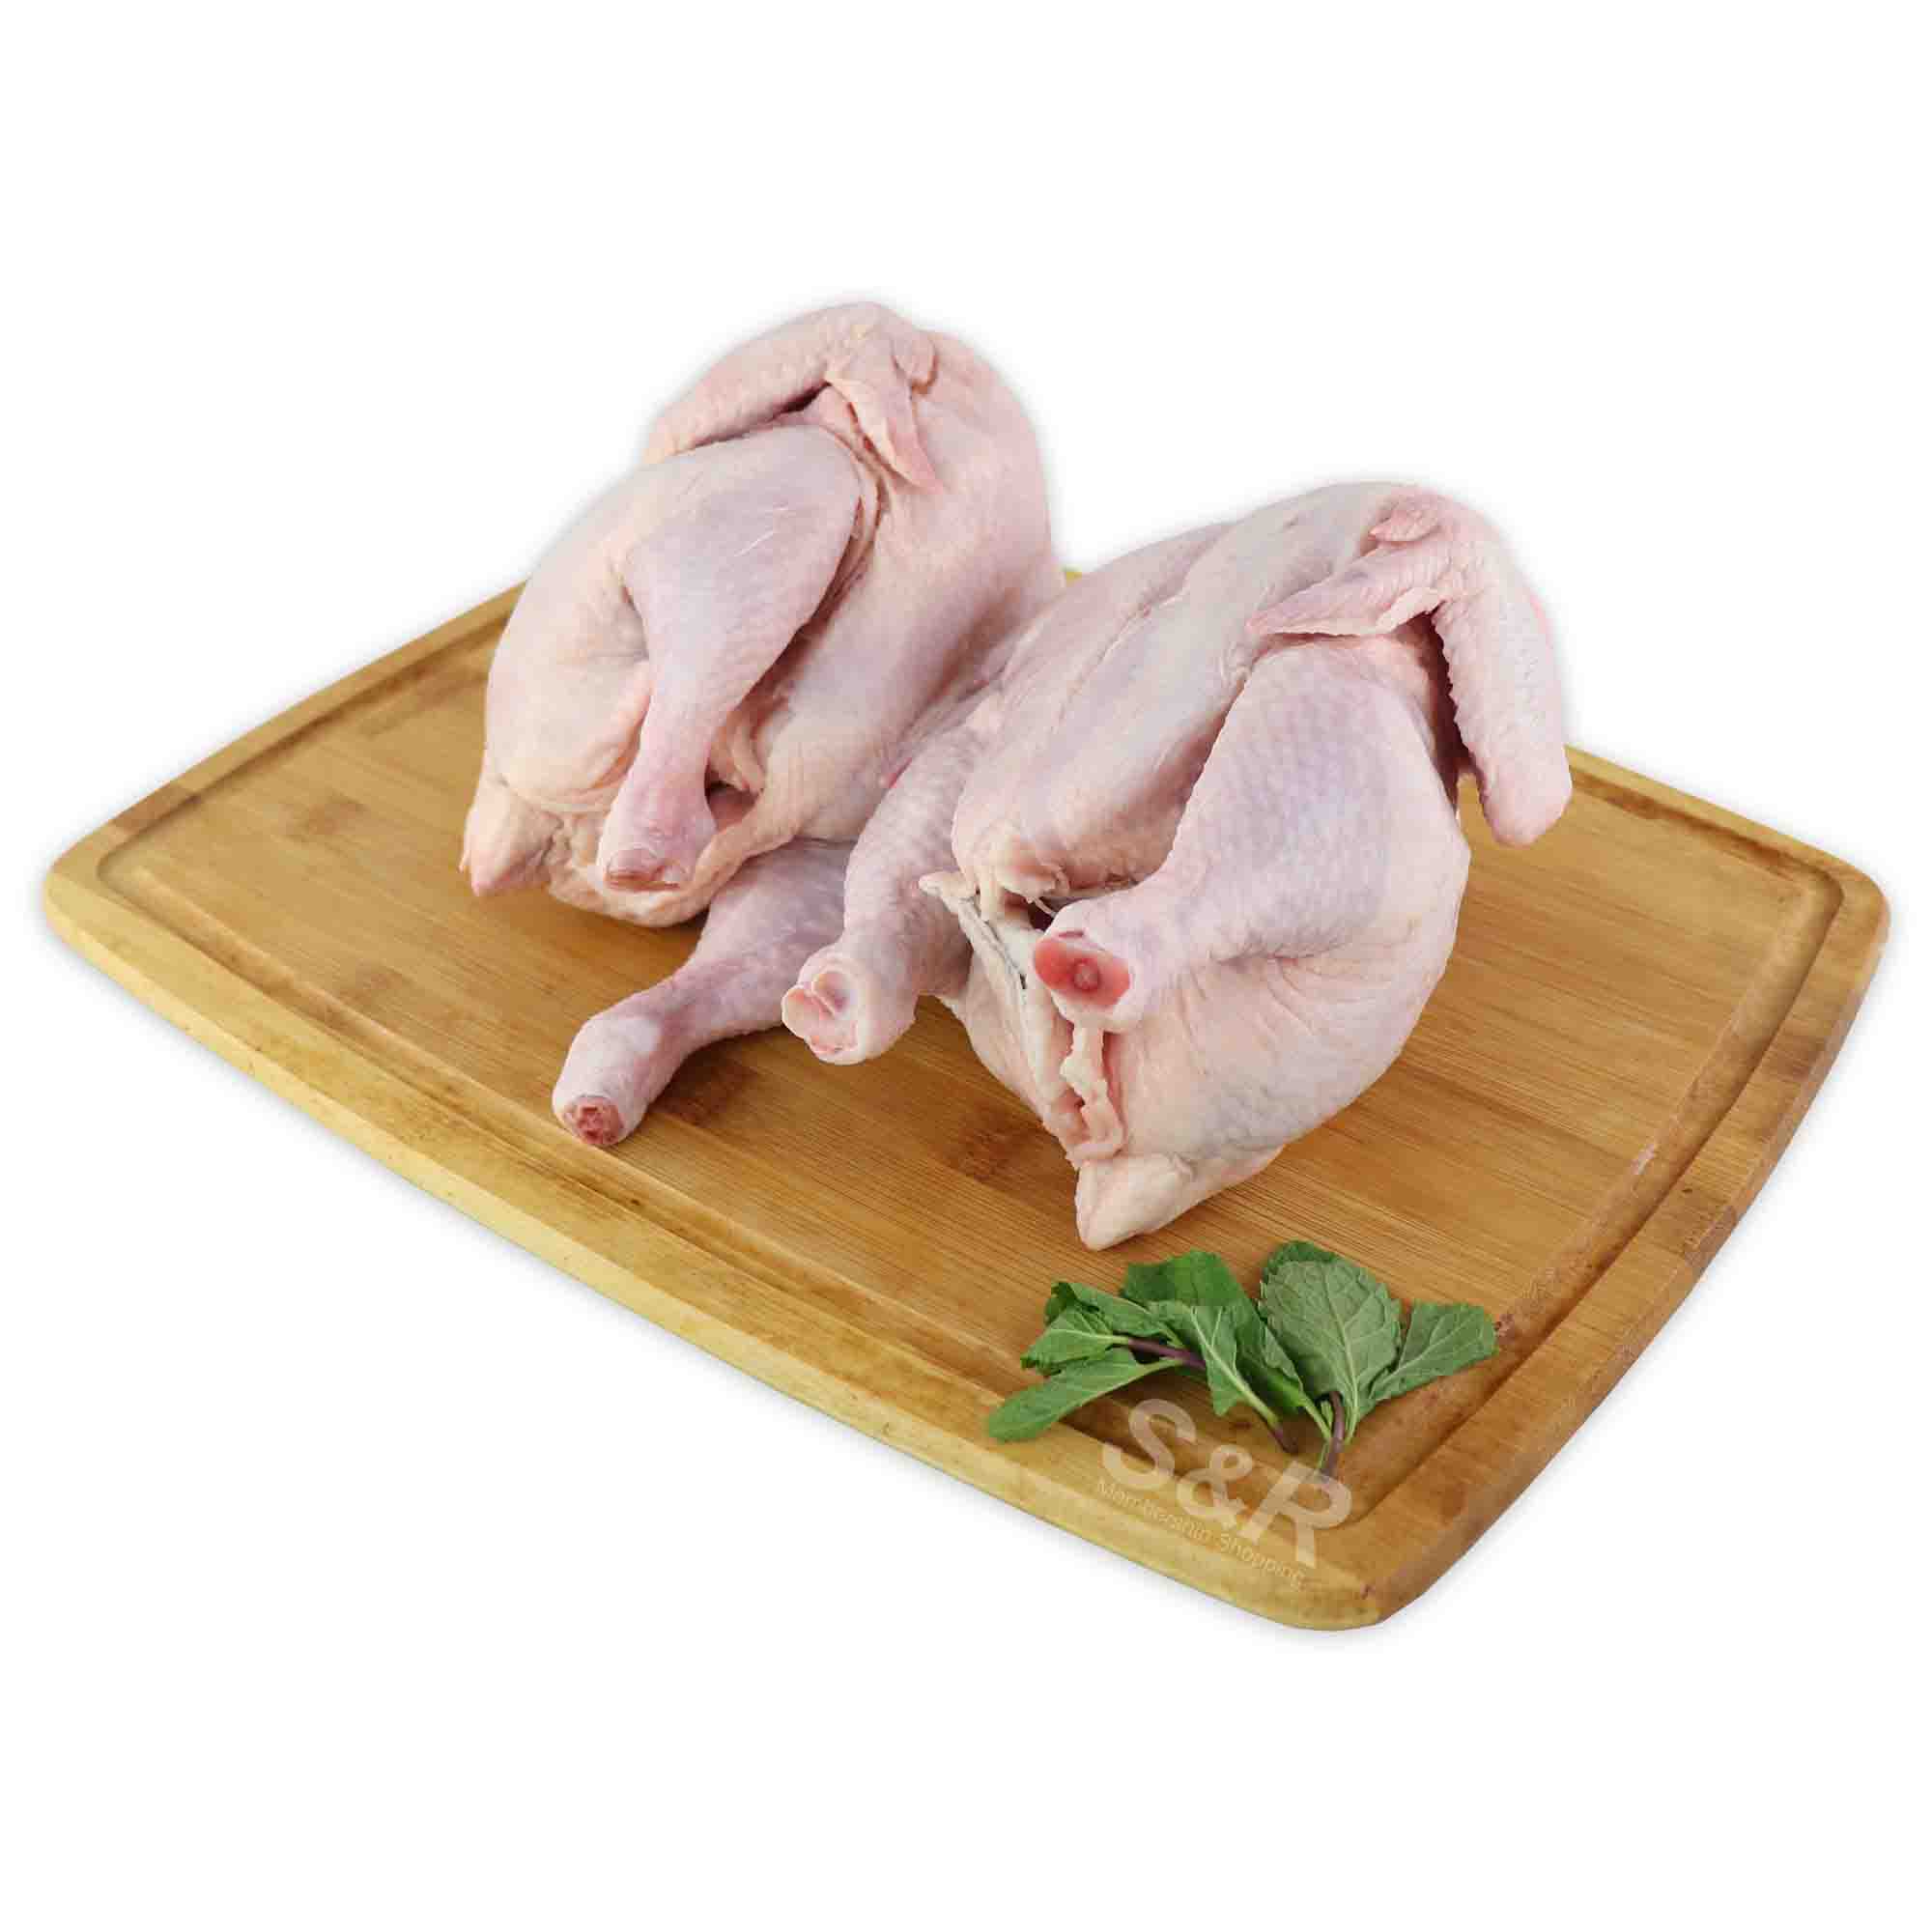 Magnolia Whole Chicken approx. 1.5kg